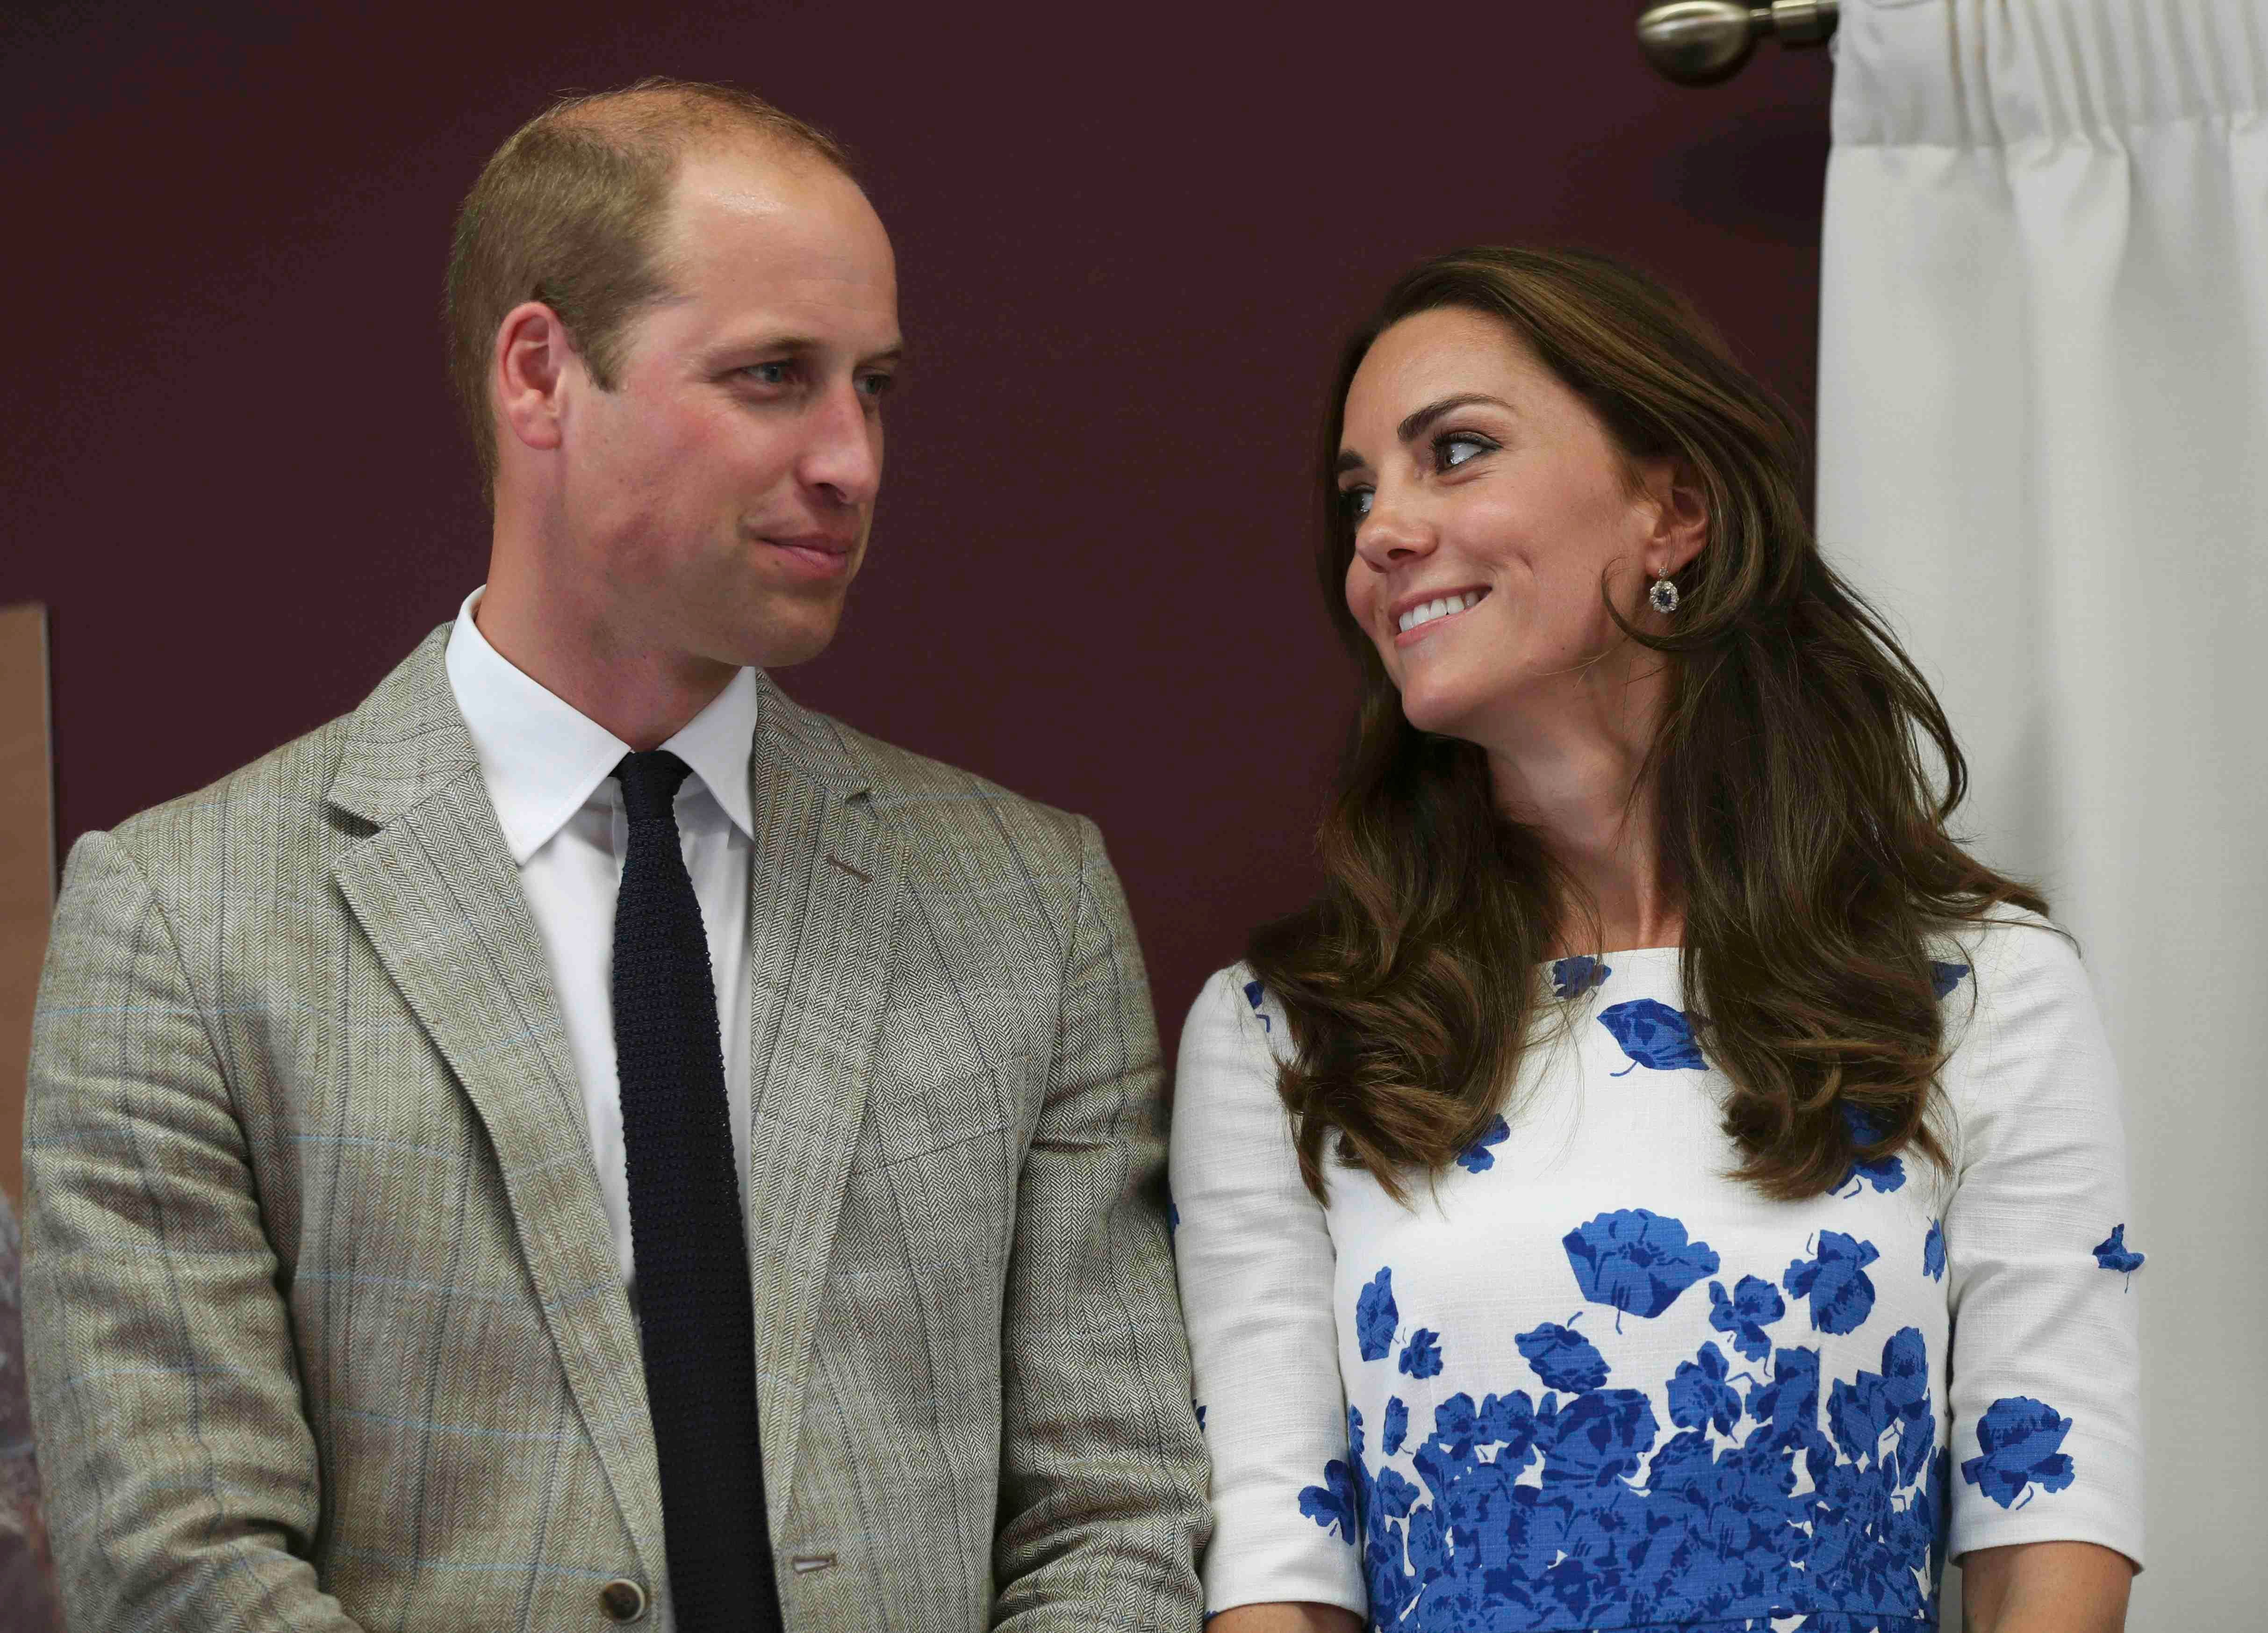 Prince William and Duchess of Kate during their visit to Keech Hospice Care on August 24, 2016, in Luton, England | Photo: Getty Images